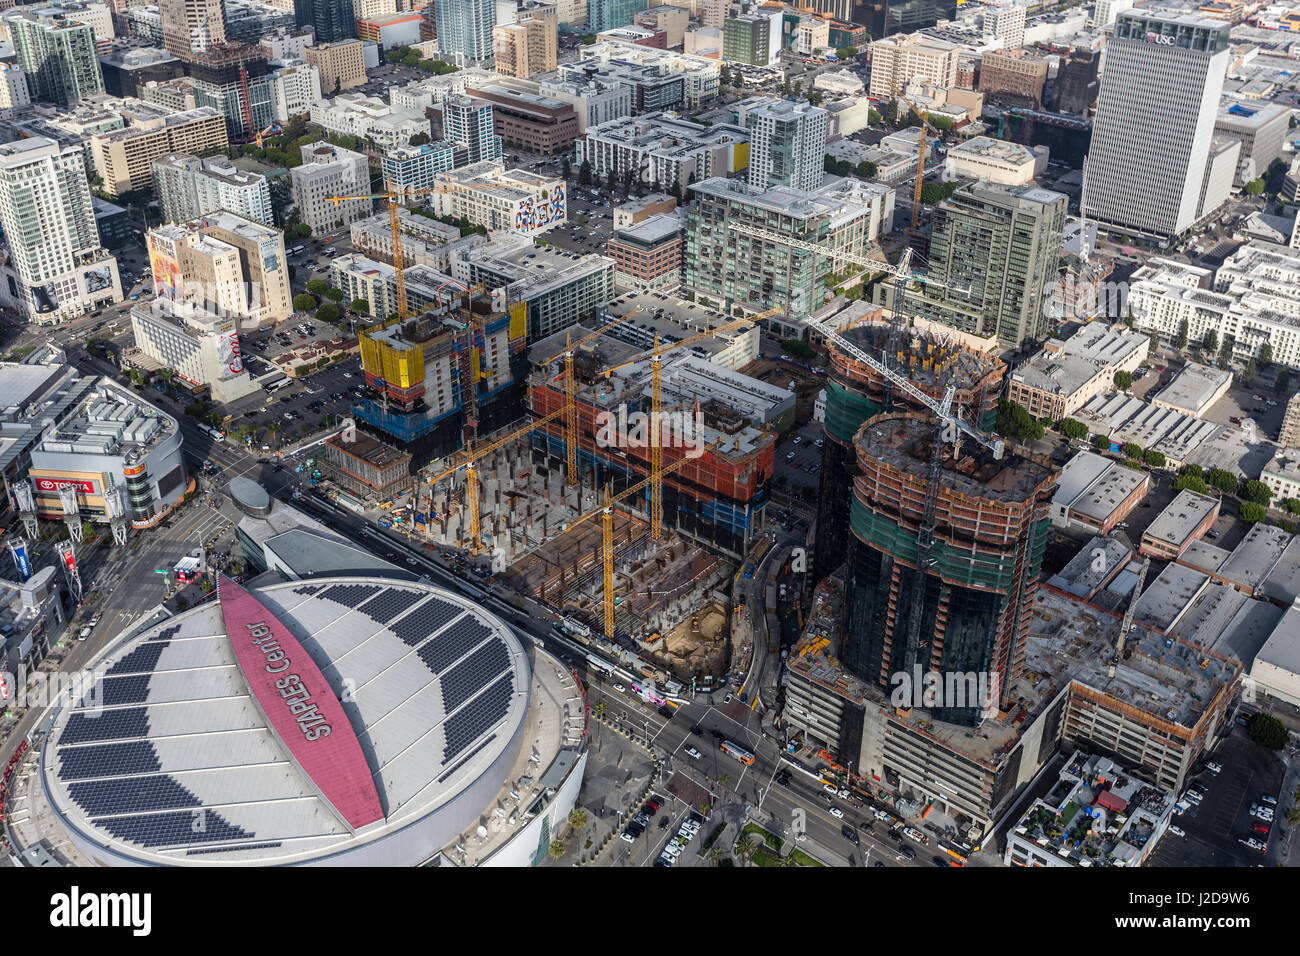 Los Angeles, California, USA - April 12, 2017:  Aerial view of Staples Center and neighboring Oceanwide Plaza construction site. Stock Photo